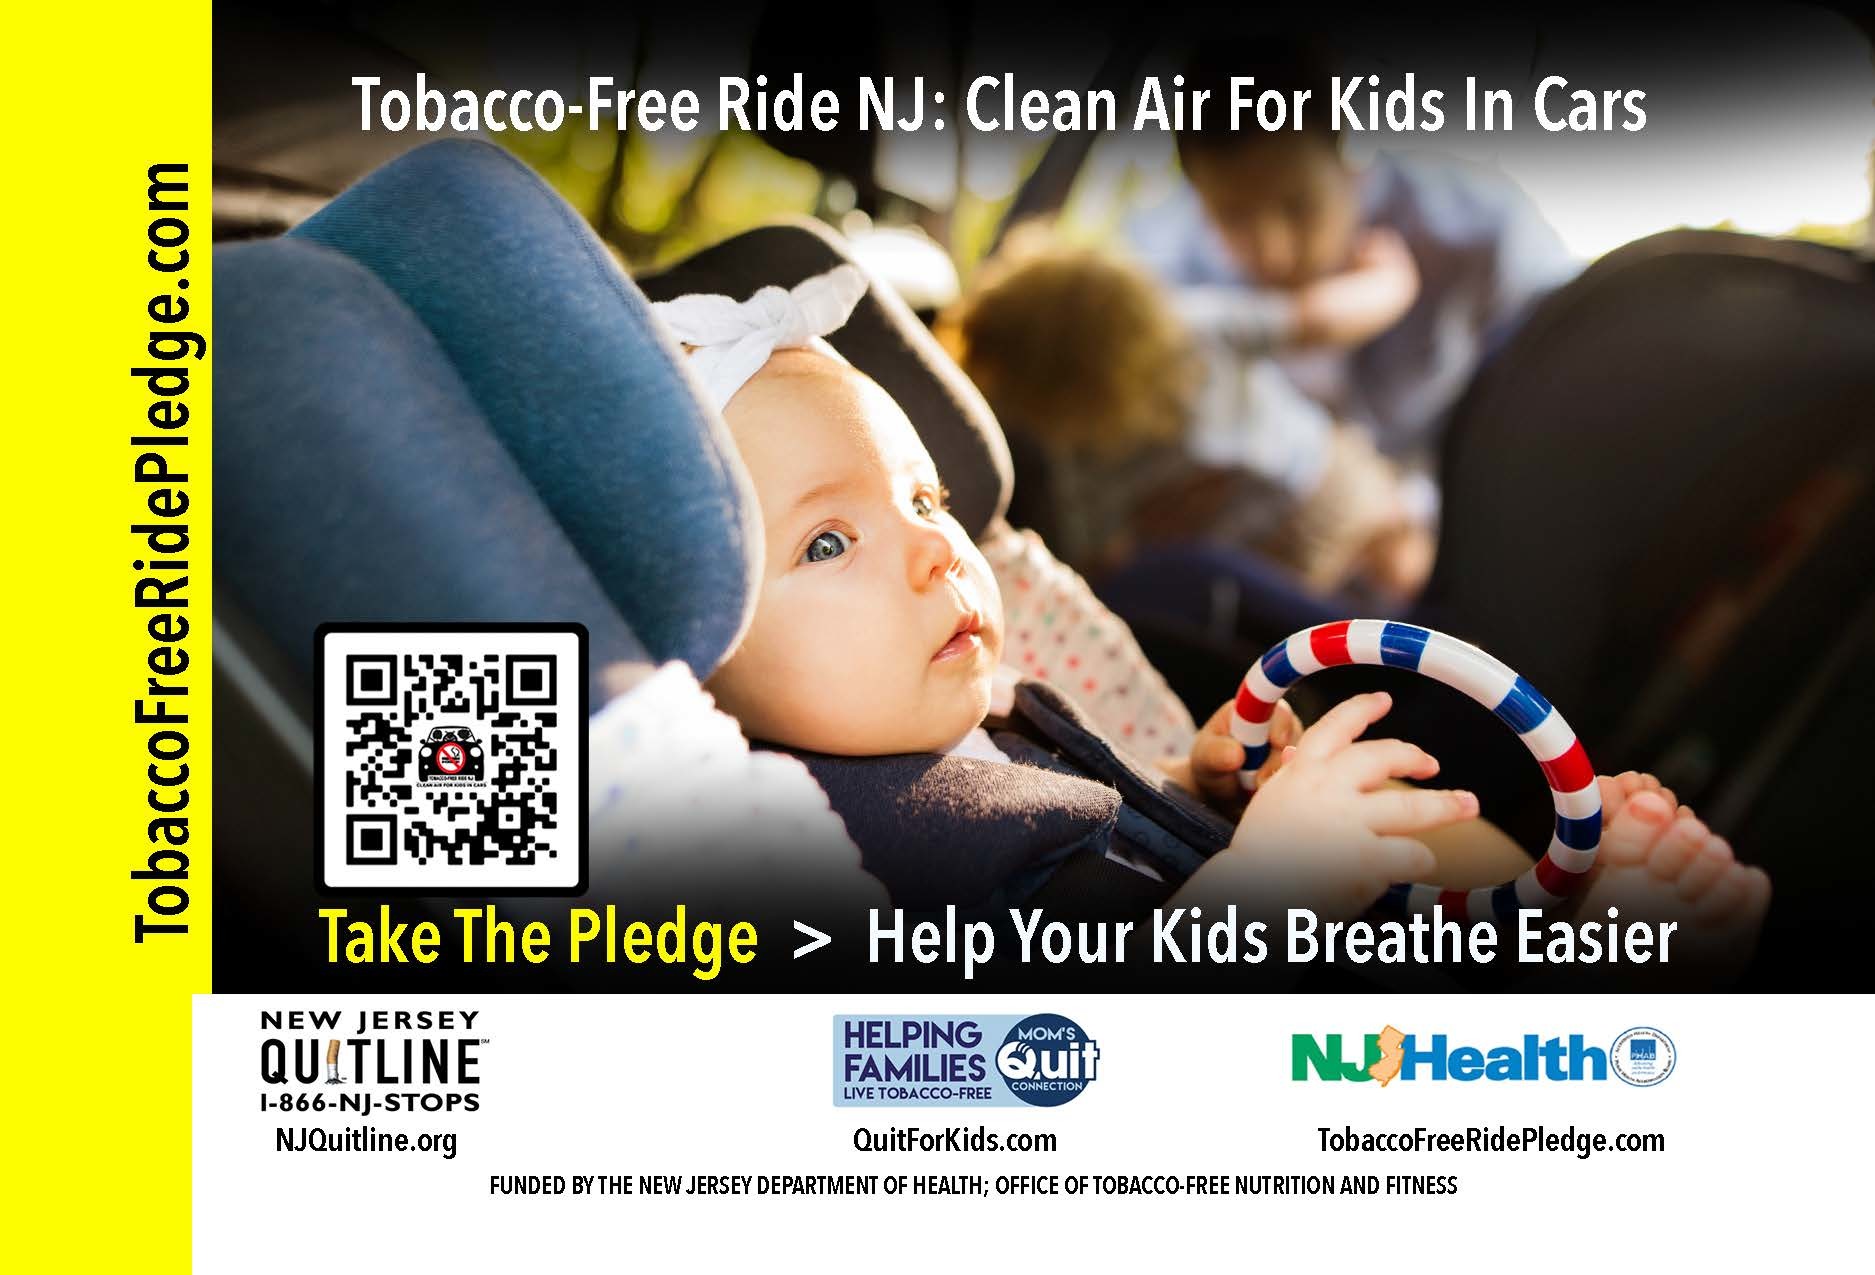 Tobacco-Free Ride NJ: Clean Air for Kids in Cars postcard